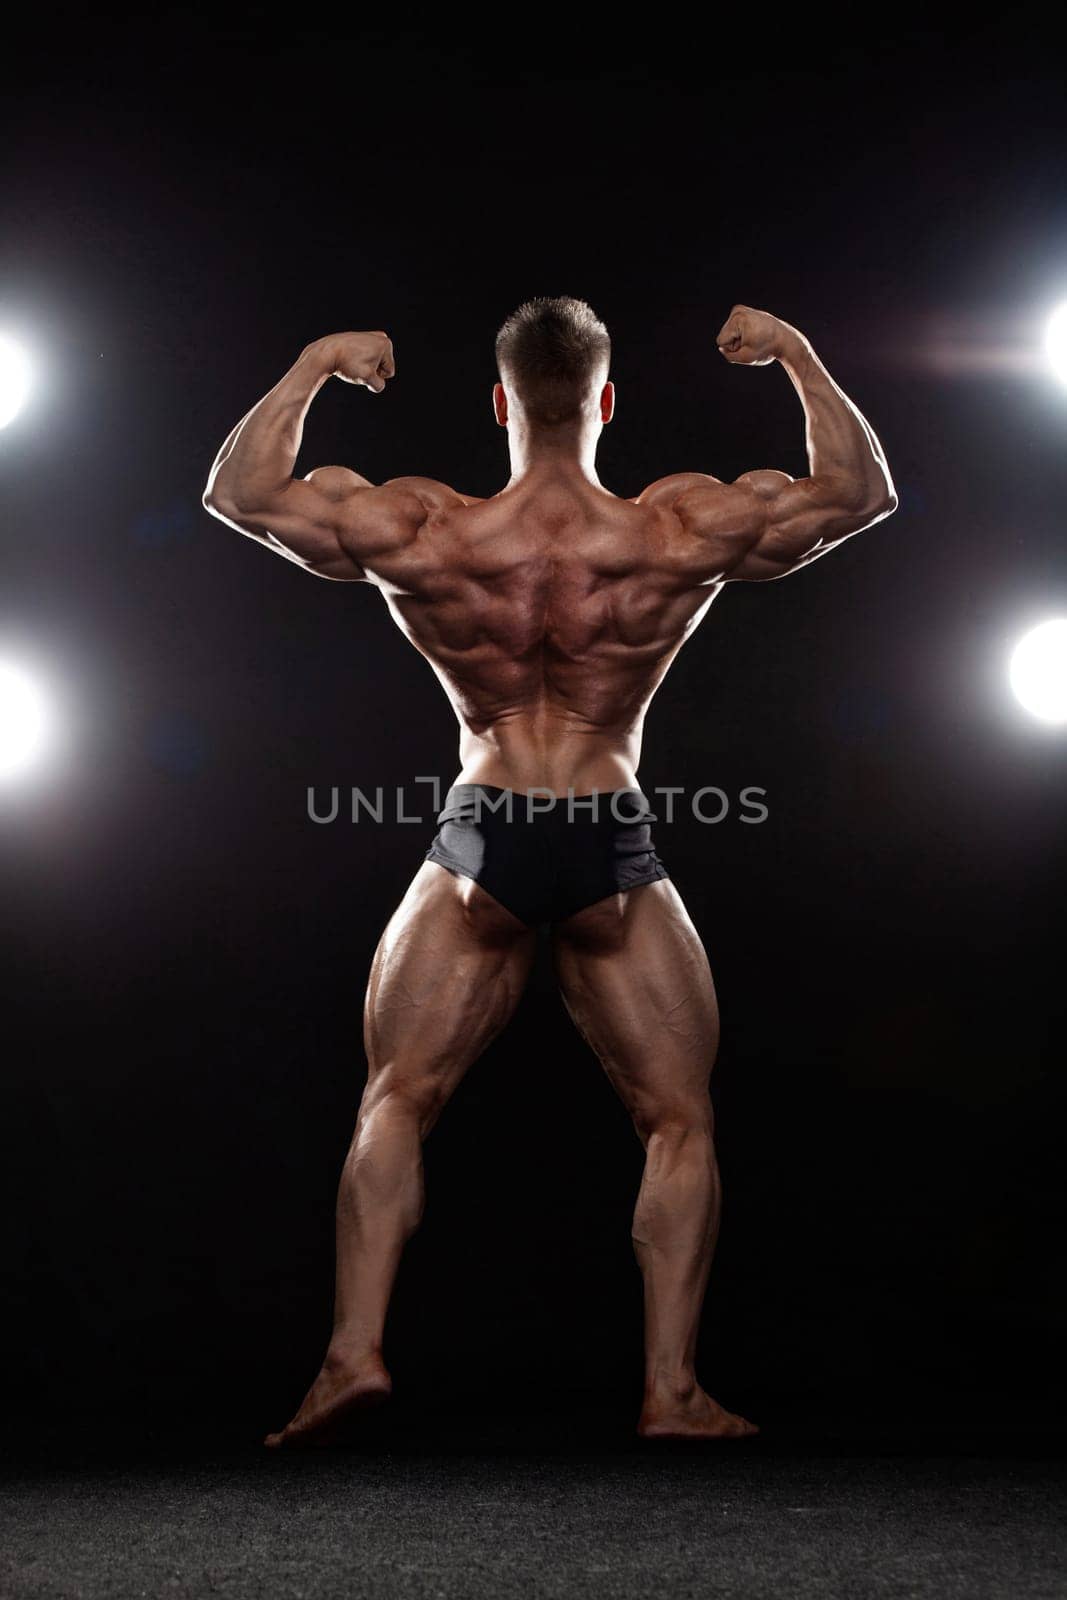 Strong muscular bodybuilder athlete man posing and pumping up muscles on black background. Workout bodybuilding concept. by MikeOrlov